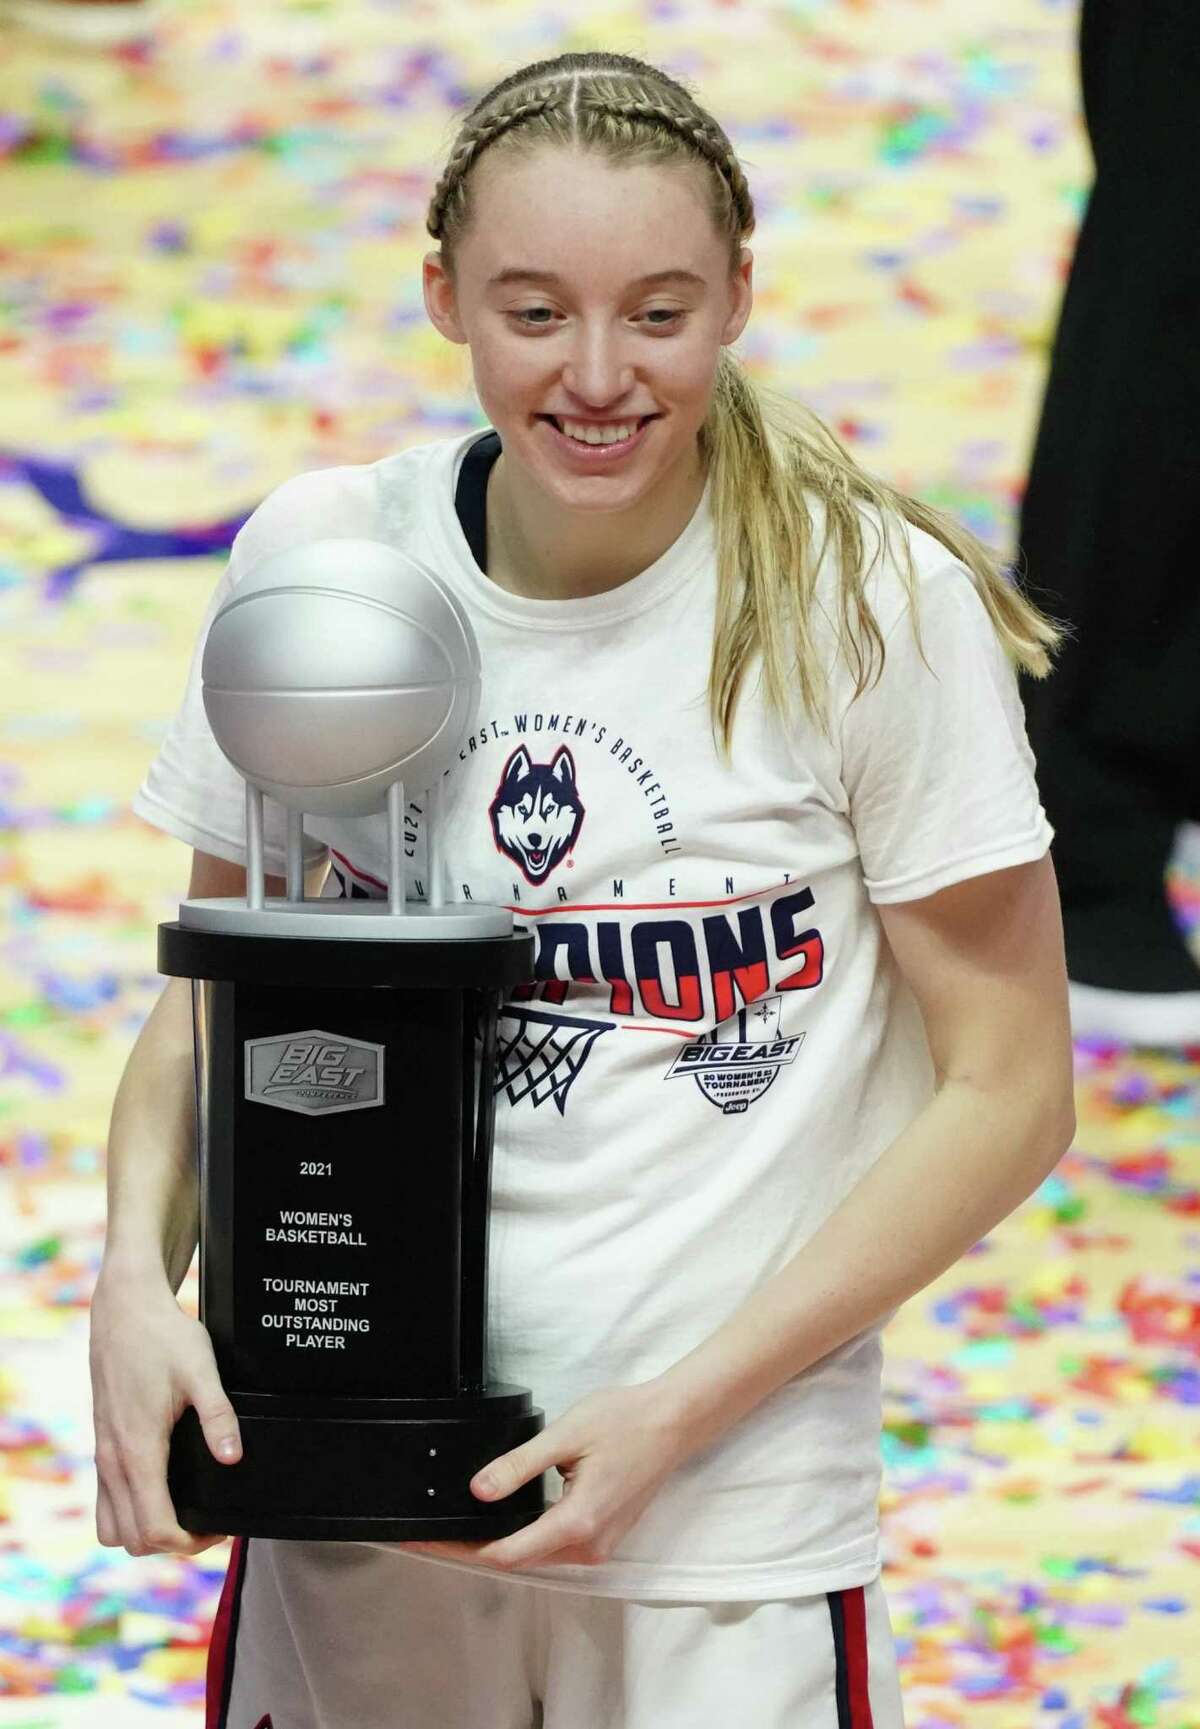 UConn’s Paige Bueckers holds the Most Oustanding Player trophy after winning the Big East Tournament. Bueckers is recovering from ankle surgery and experts say the prognosis is good.